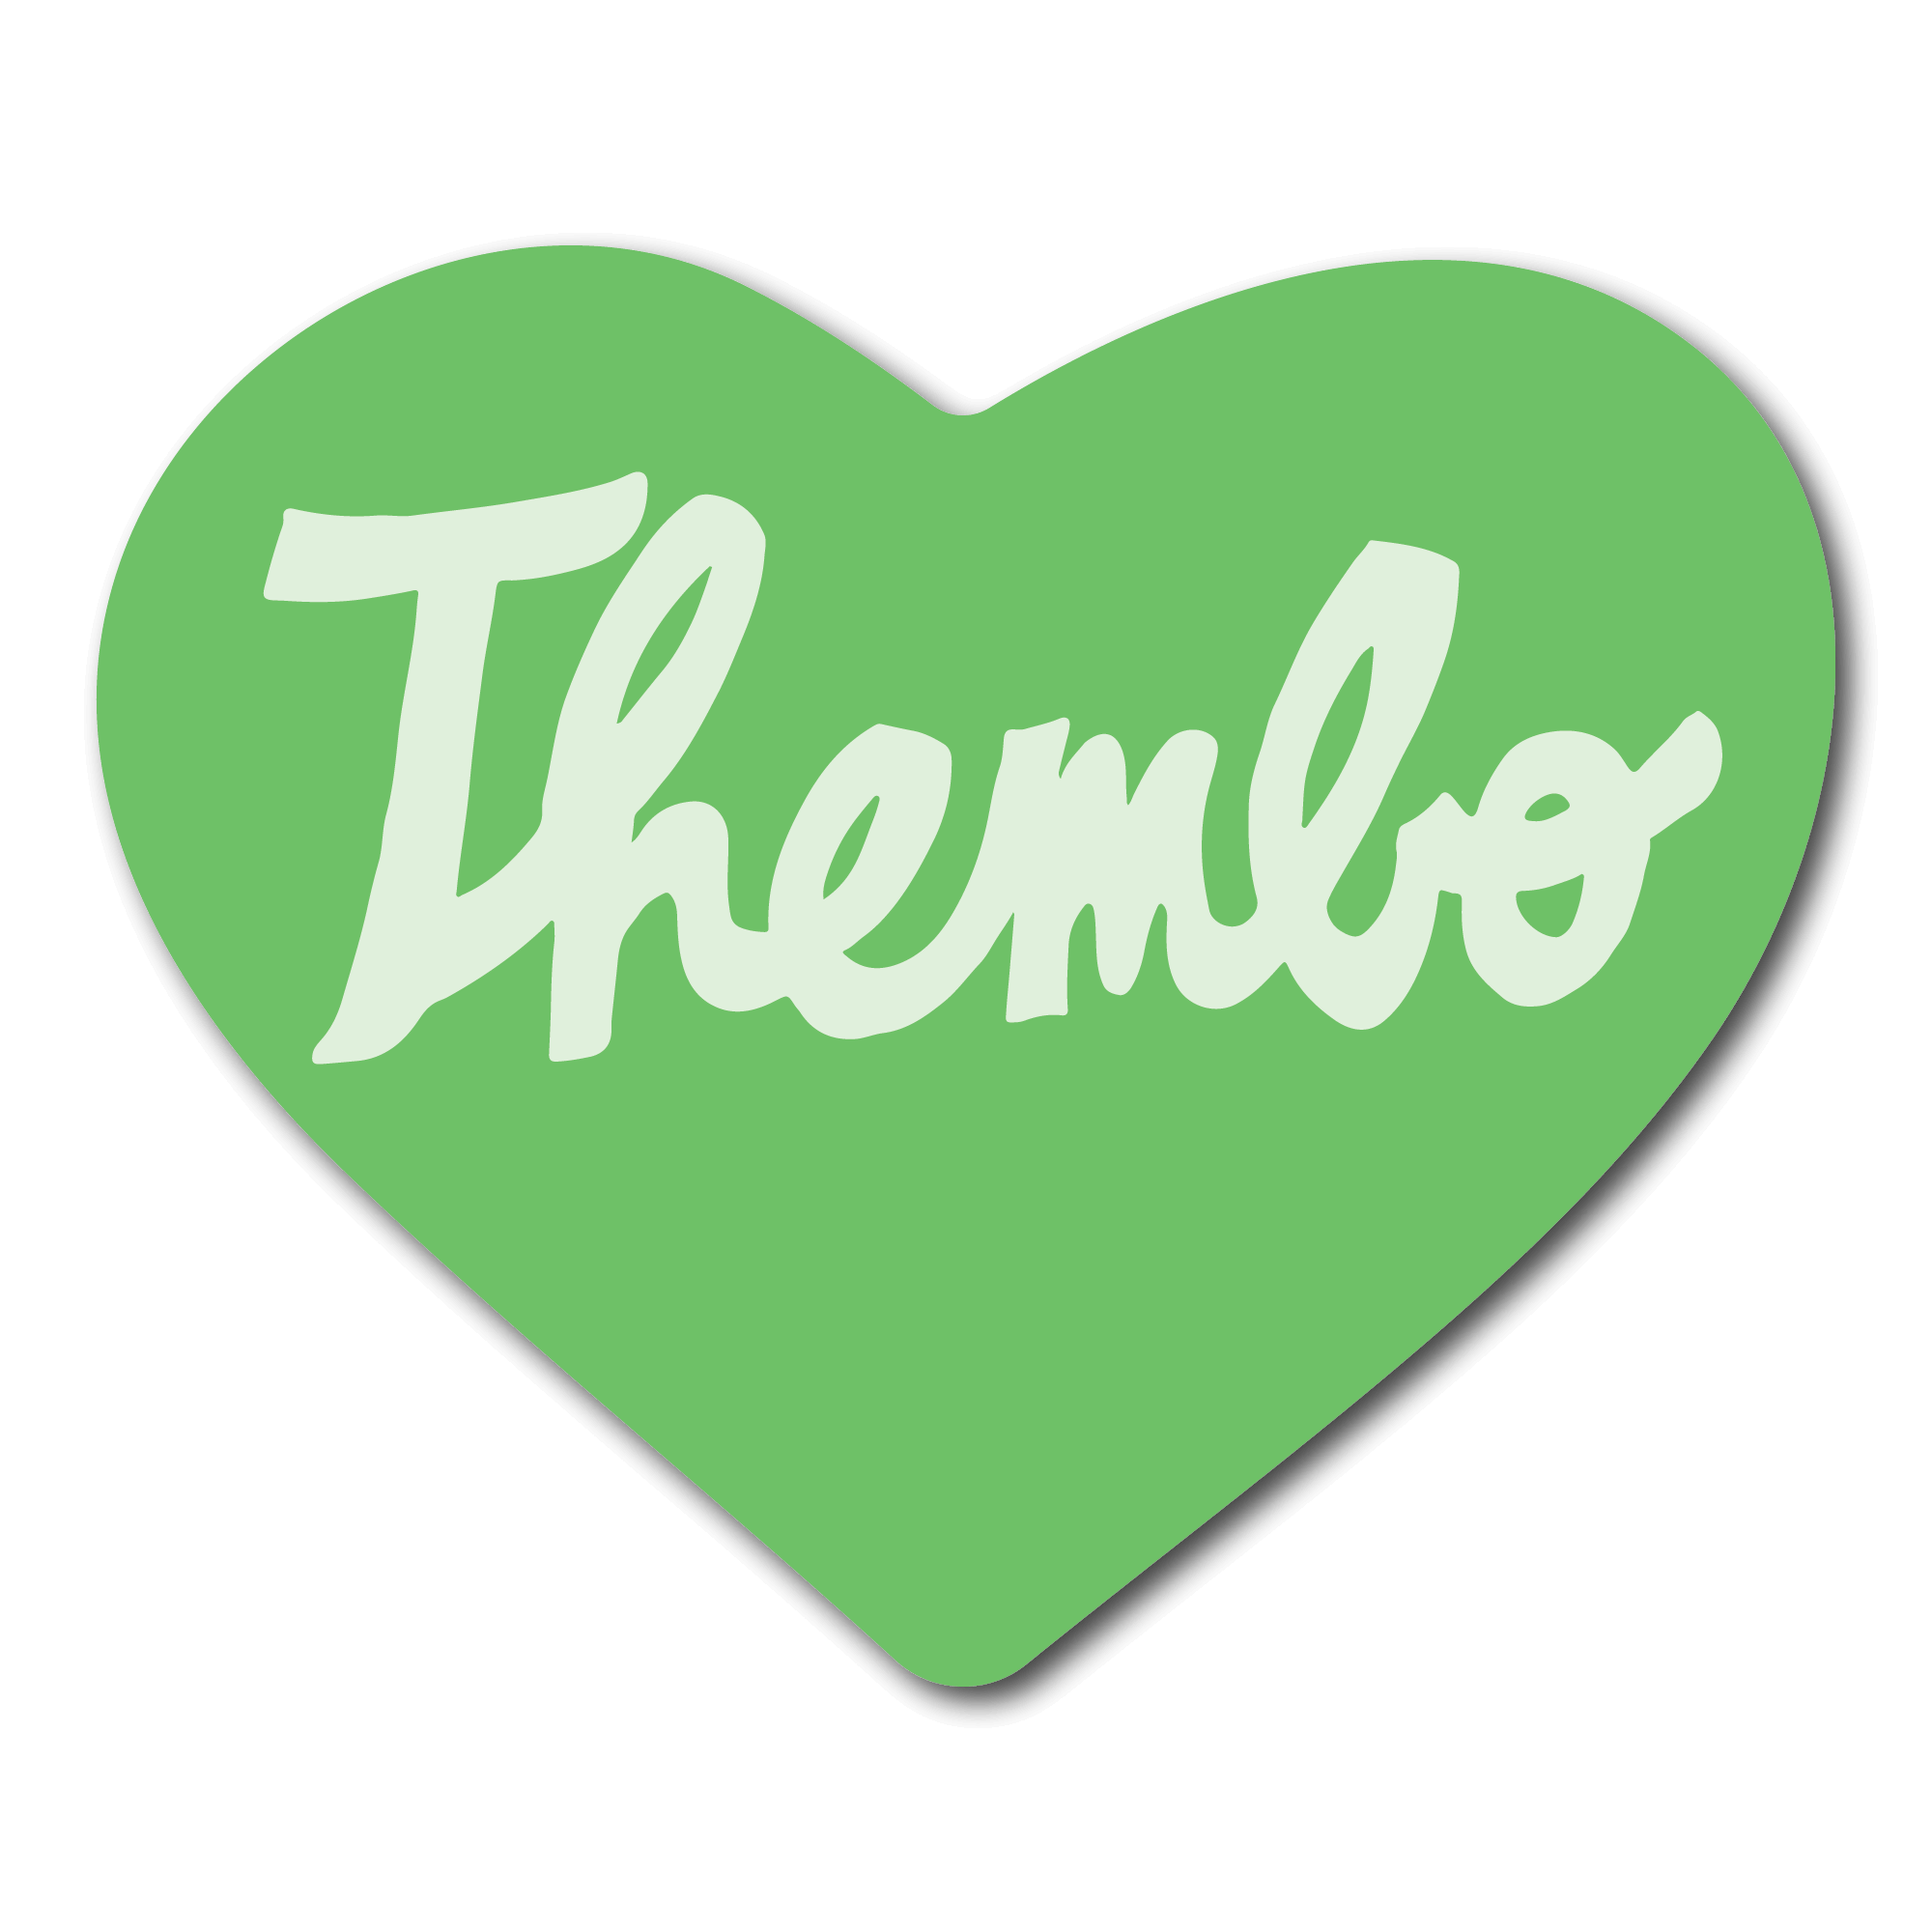 Small Green Heart sticker that says thembo